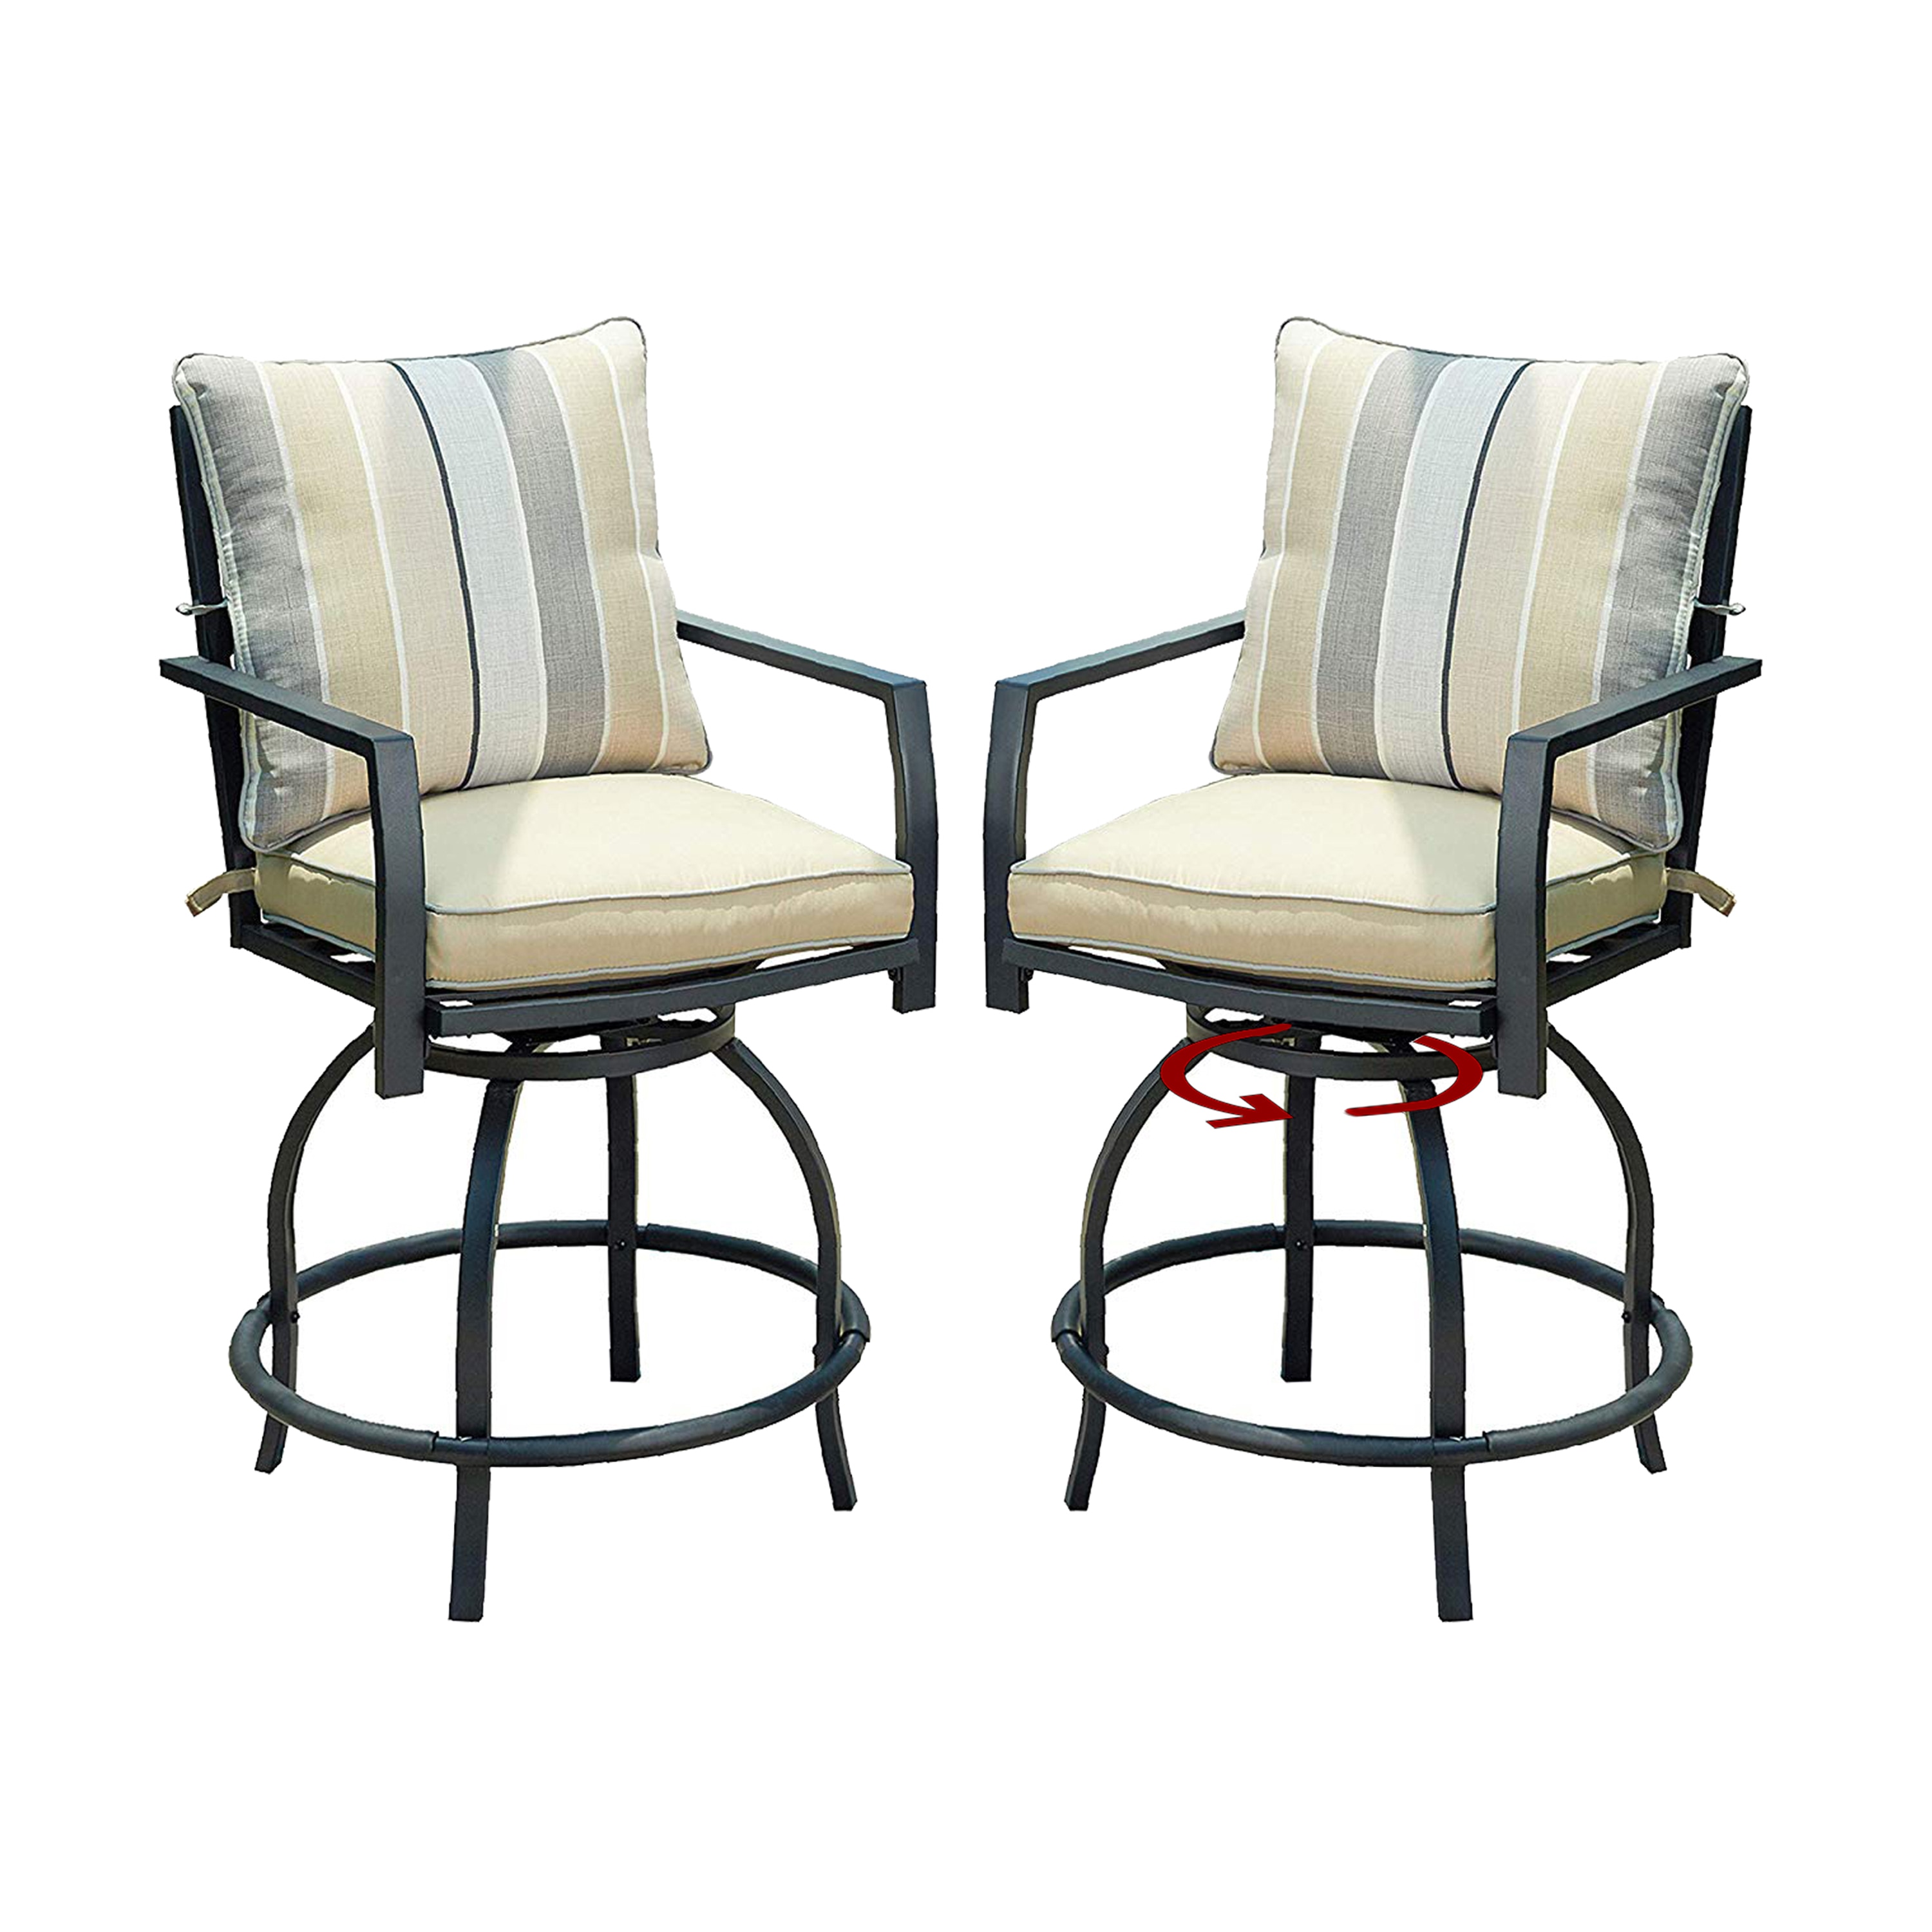 2 Bar Chairs,Wood Color Top Space 2 Piece Patio Chairs Set 360 Degree Swivel Bar Stools Outdoor Furniture Sets with All Weather Metal Frame 